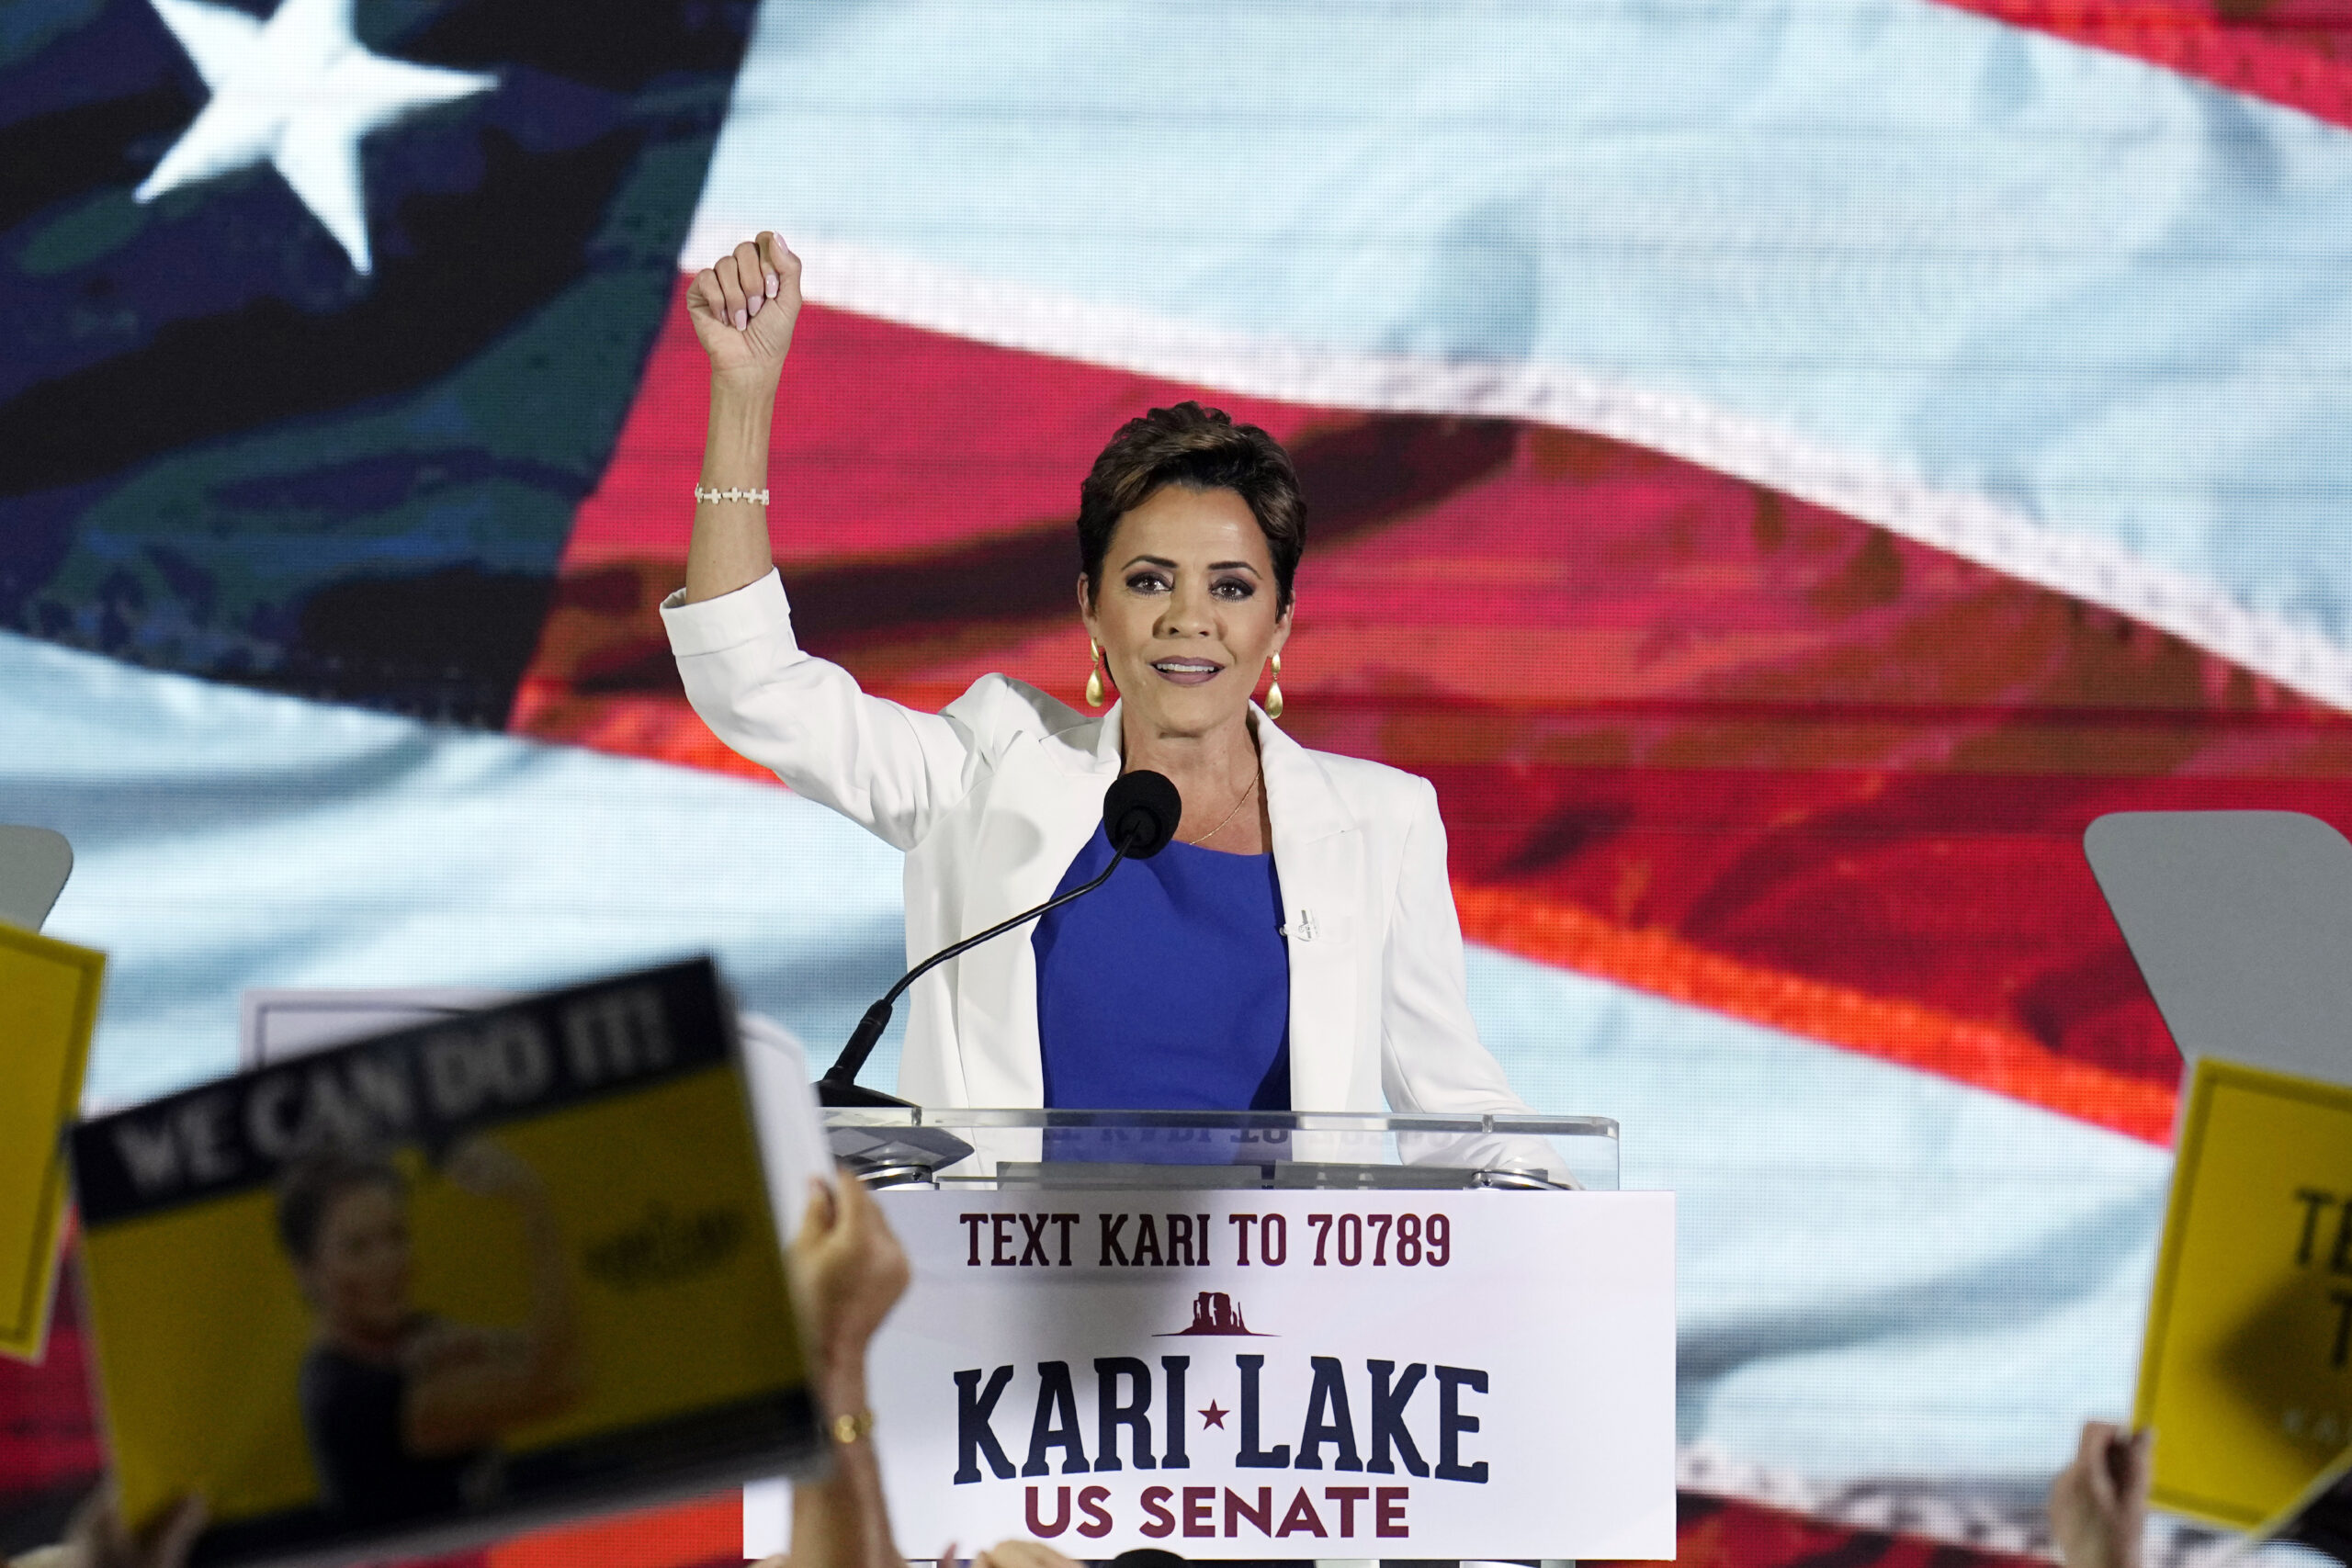 Arizona GOP chairman appeared to offer Kari Lake bribe to stay out of Senate race